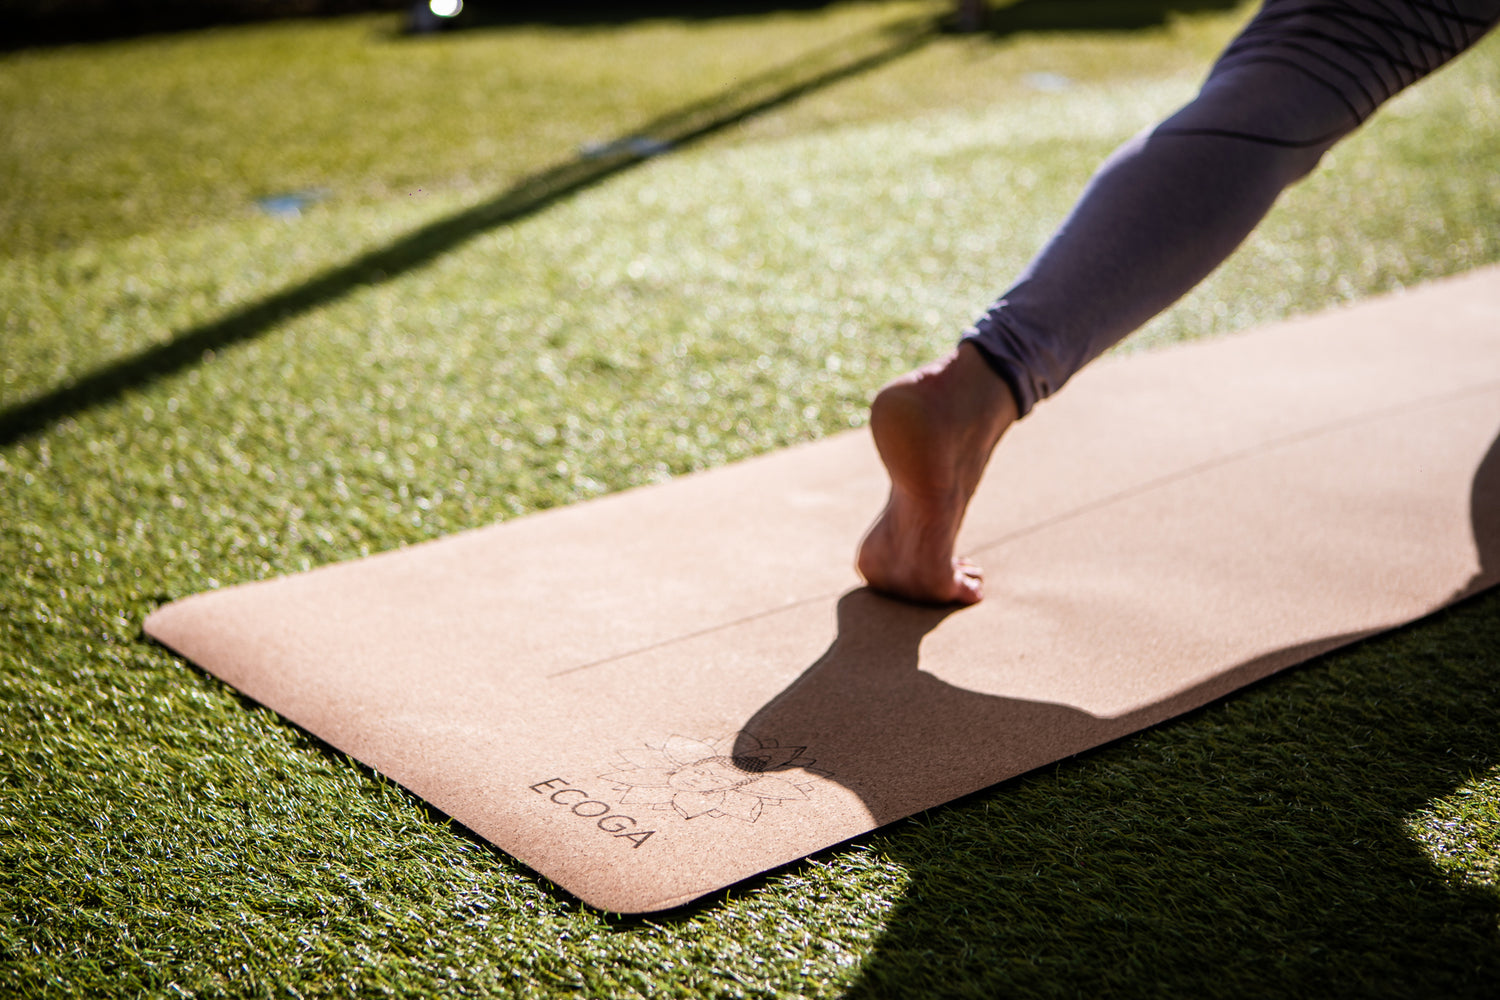 Eco-friendly exercise mat made from natural cork